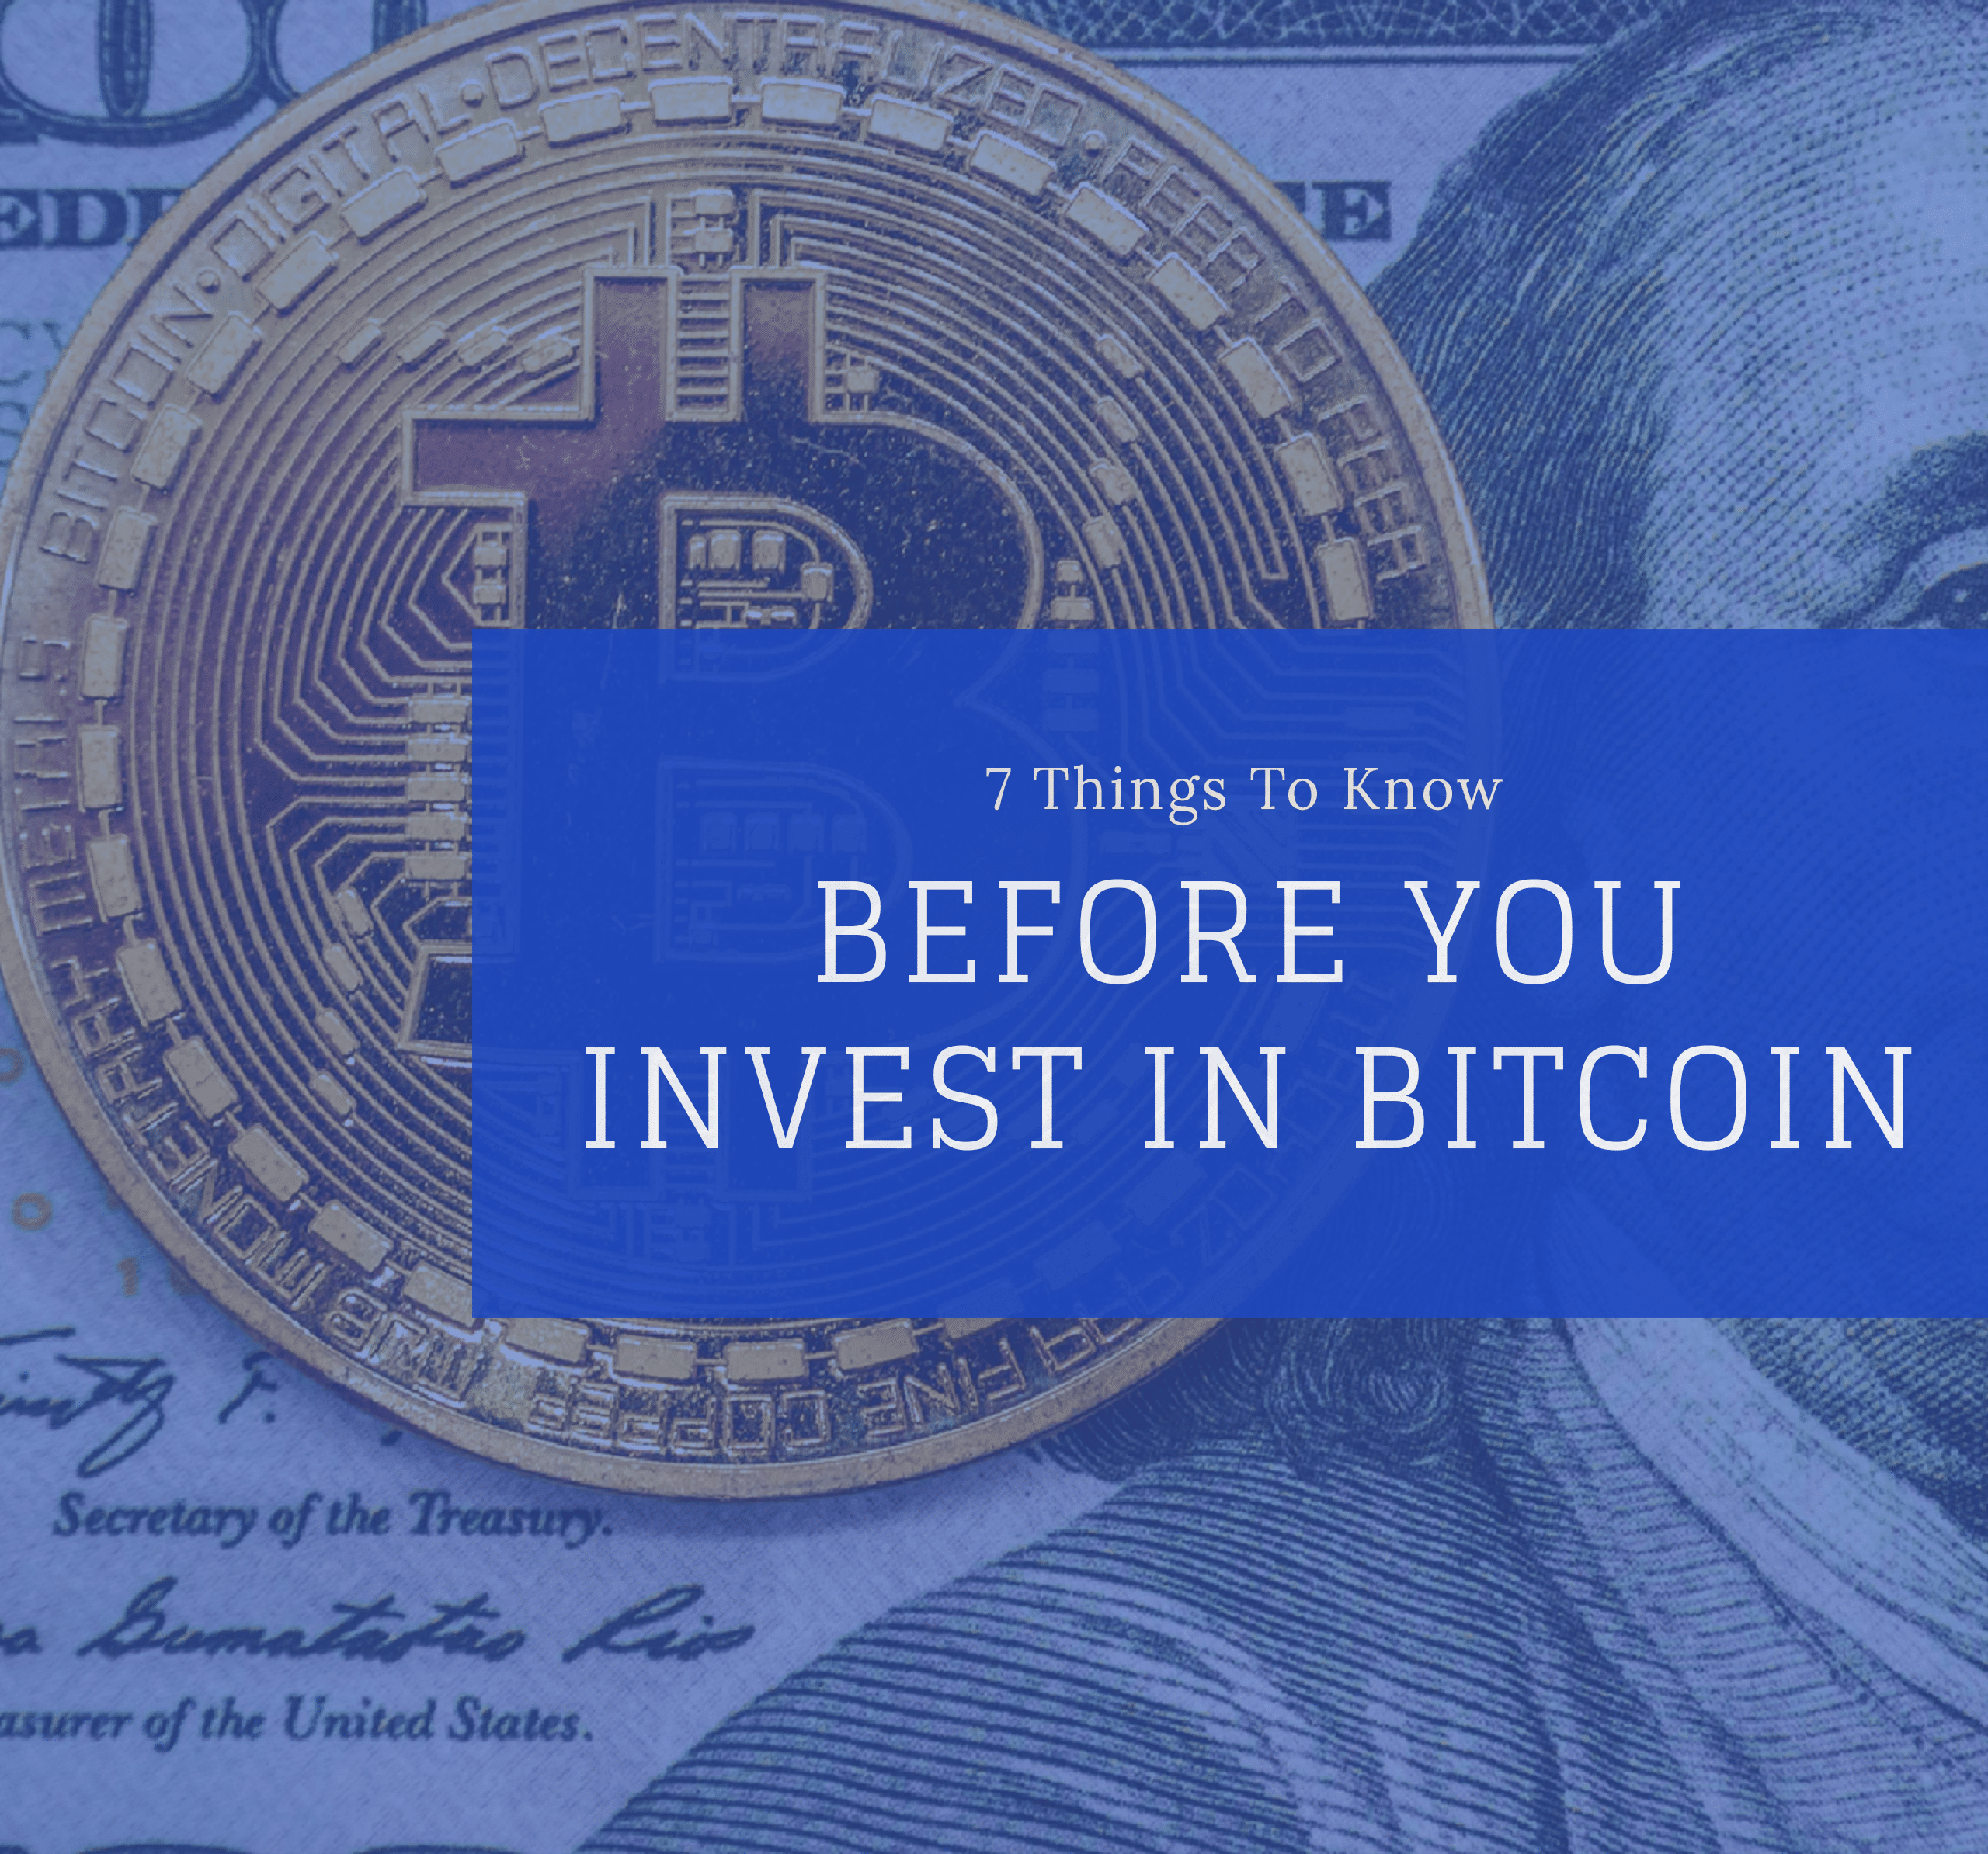 7 Things To Know Before You Invest in Bitcoin